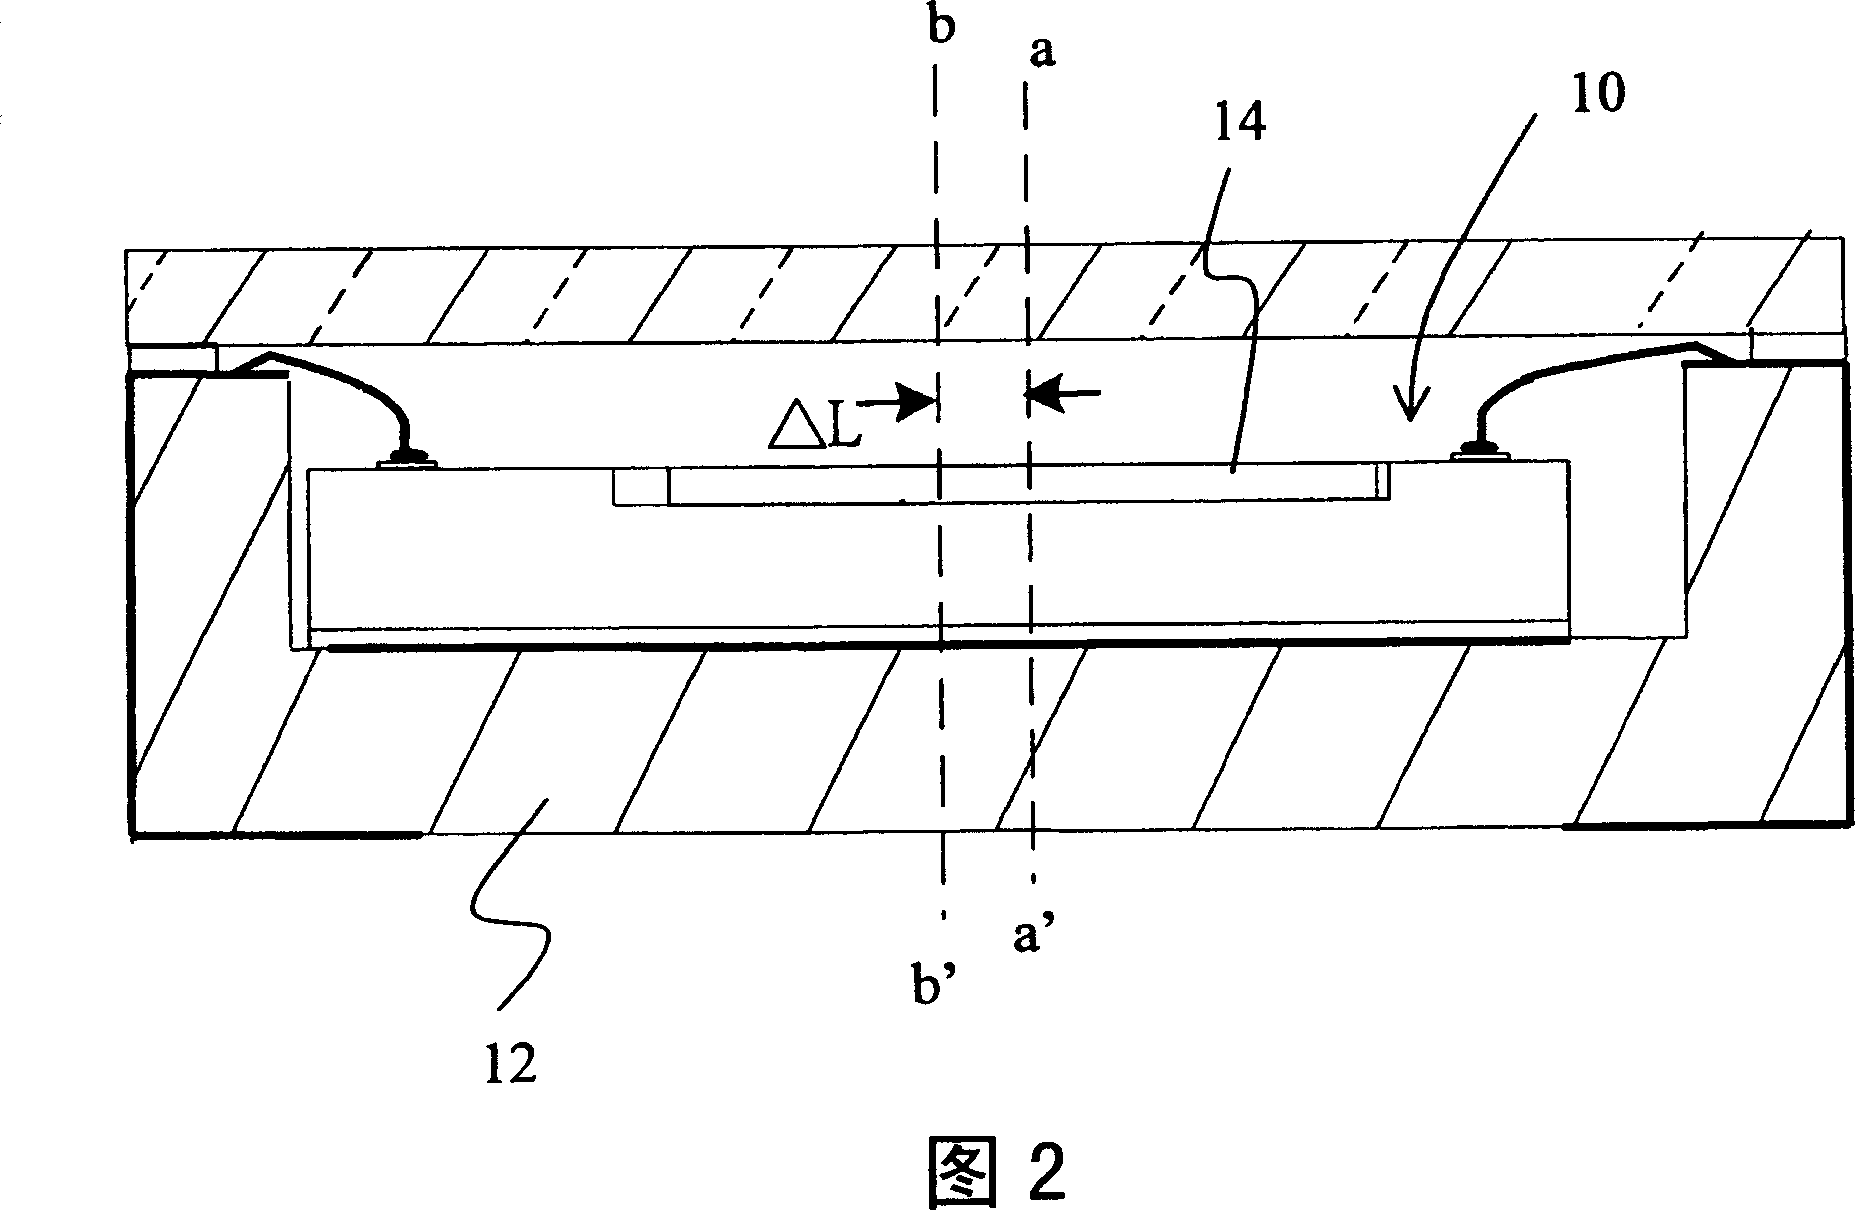 Encapsulation structure of optical sensing element with micro-packaging area